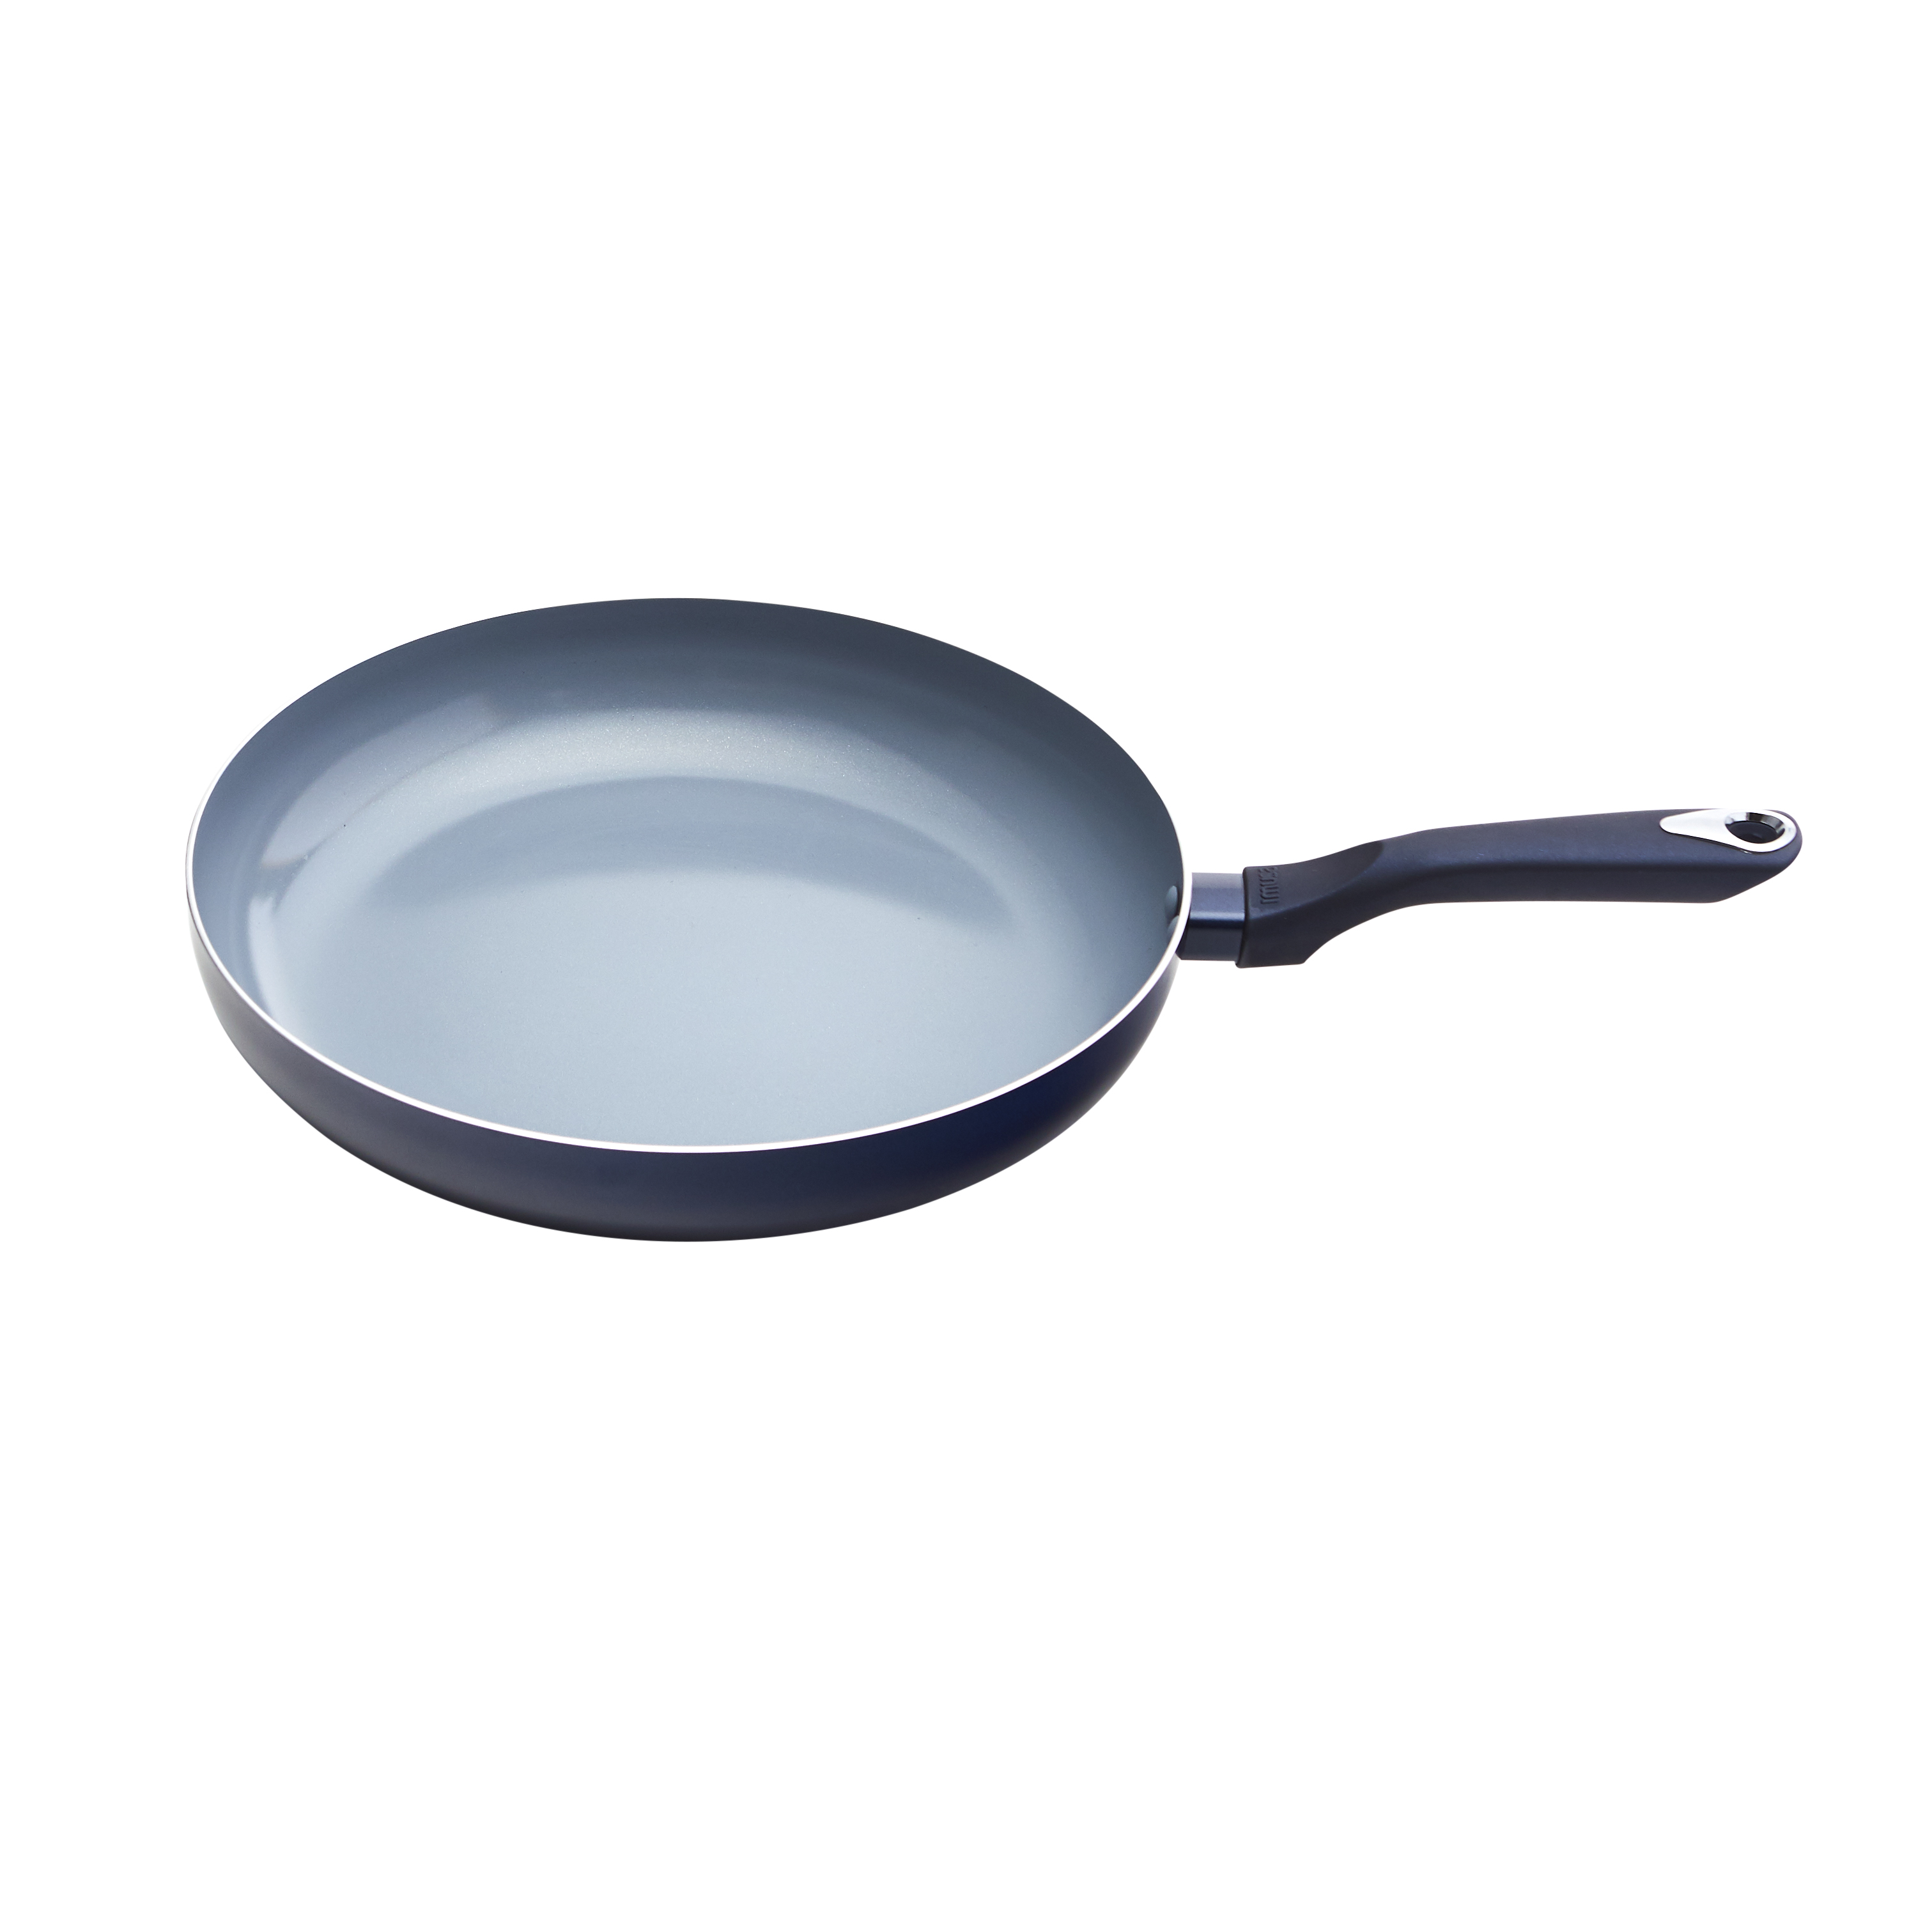 IMUSA IMUSA Blue Diamond PTFE Nonstick Ceramic Fry Pan with Soft touch  Handle, 12 inch - IMUSA